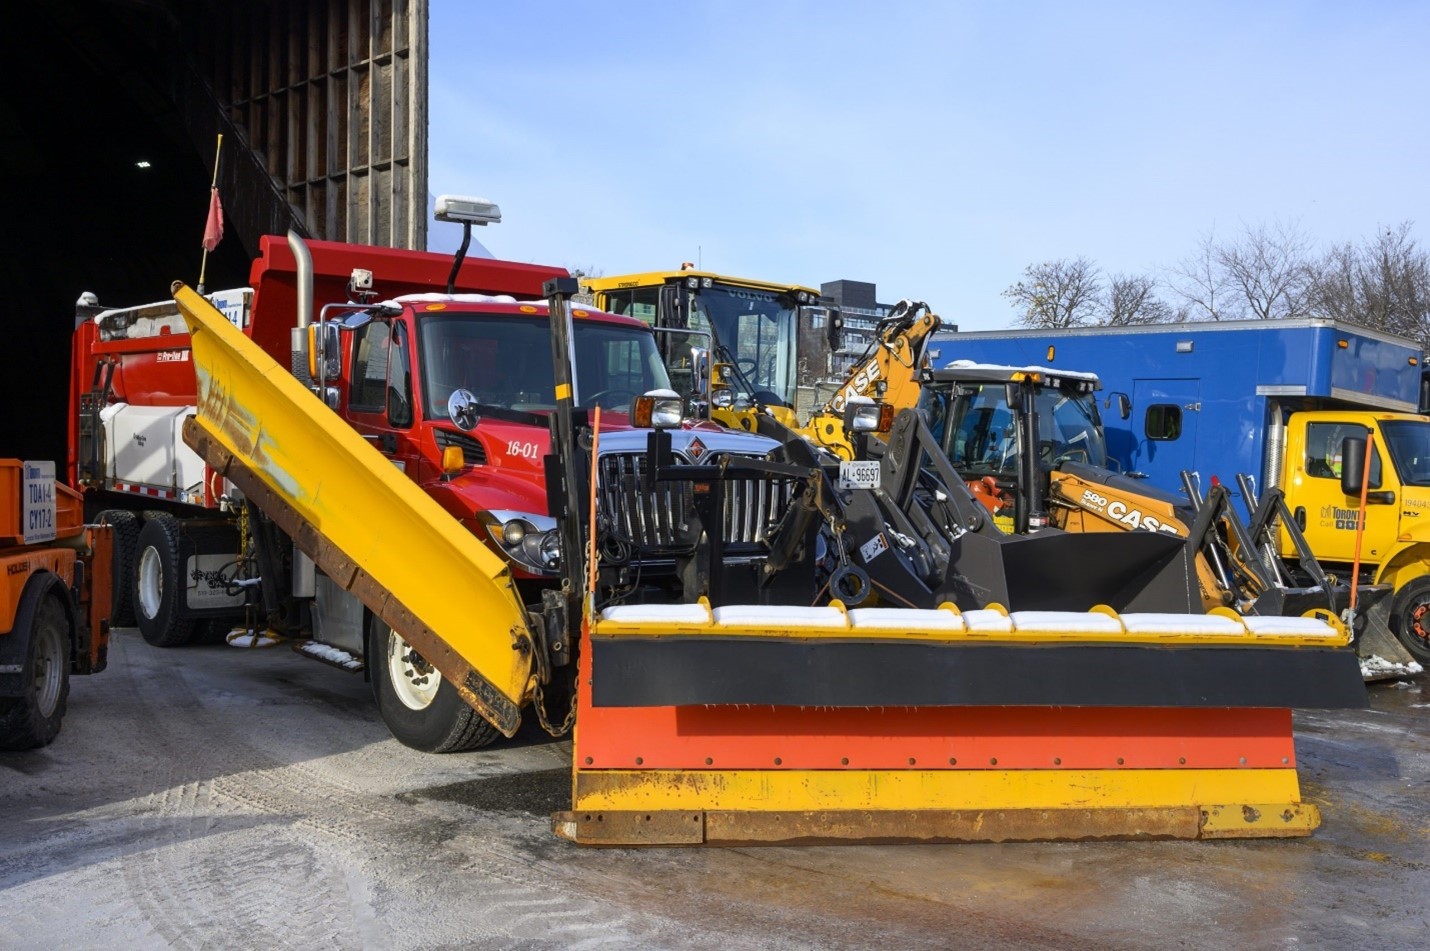 Image of snow plow ready for use in Toronto yard.